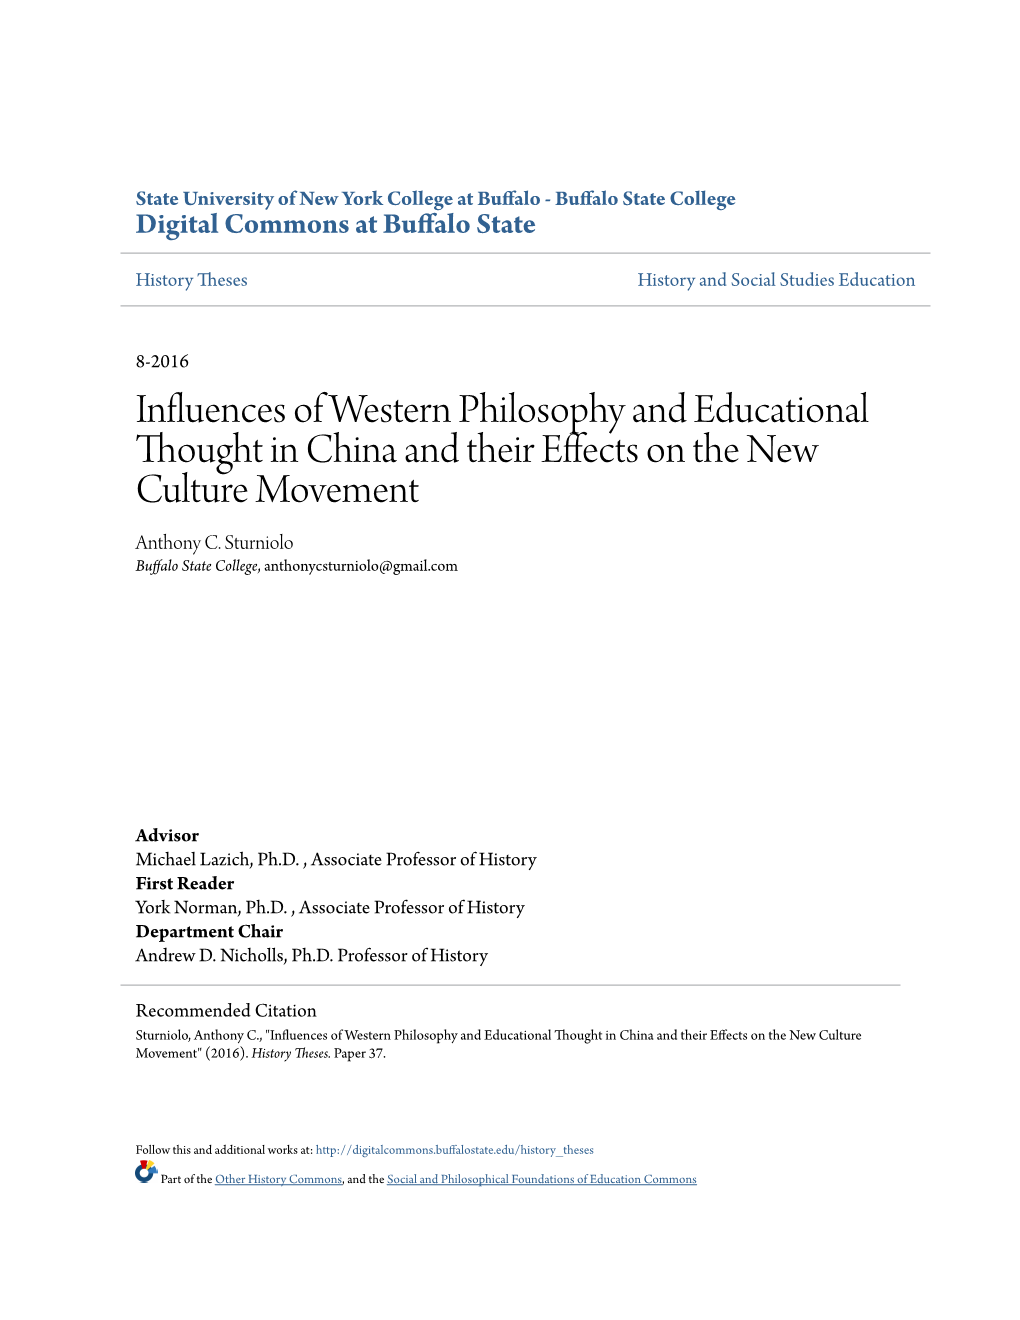 Influences of Western Philosophy and Educational Thought in China and Their Effects on the New Culture Movement Anthony C